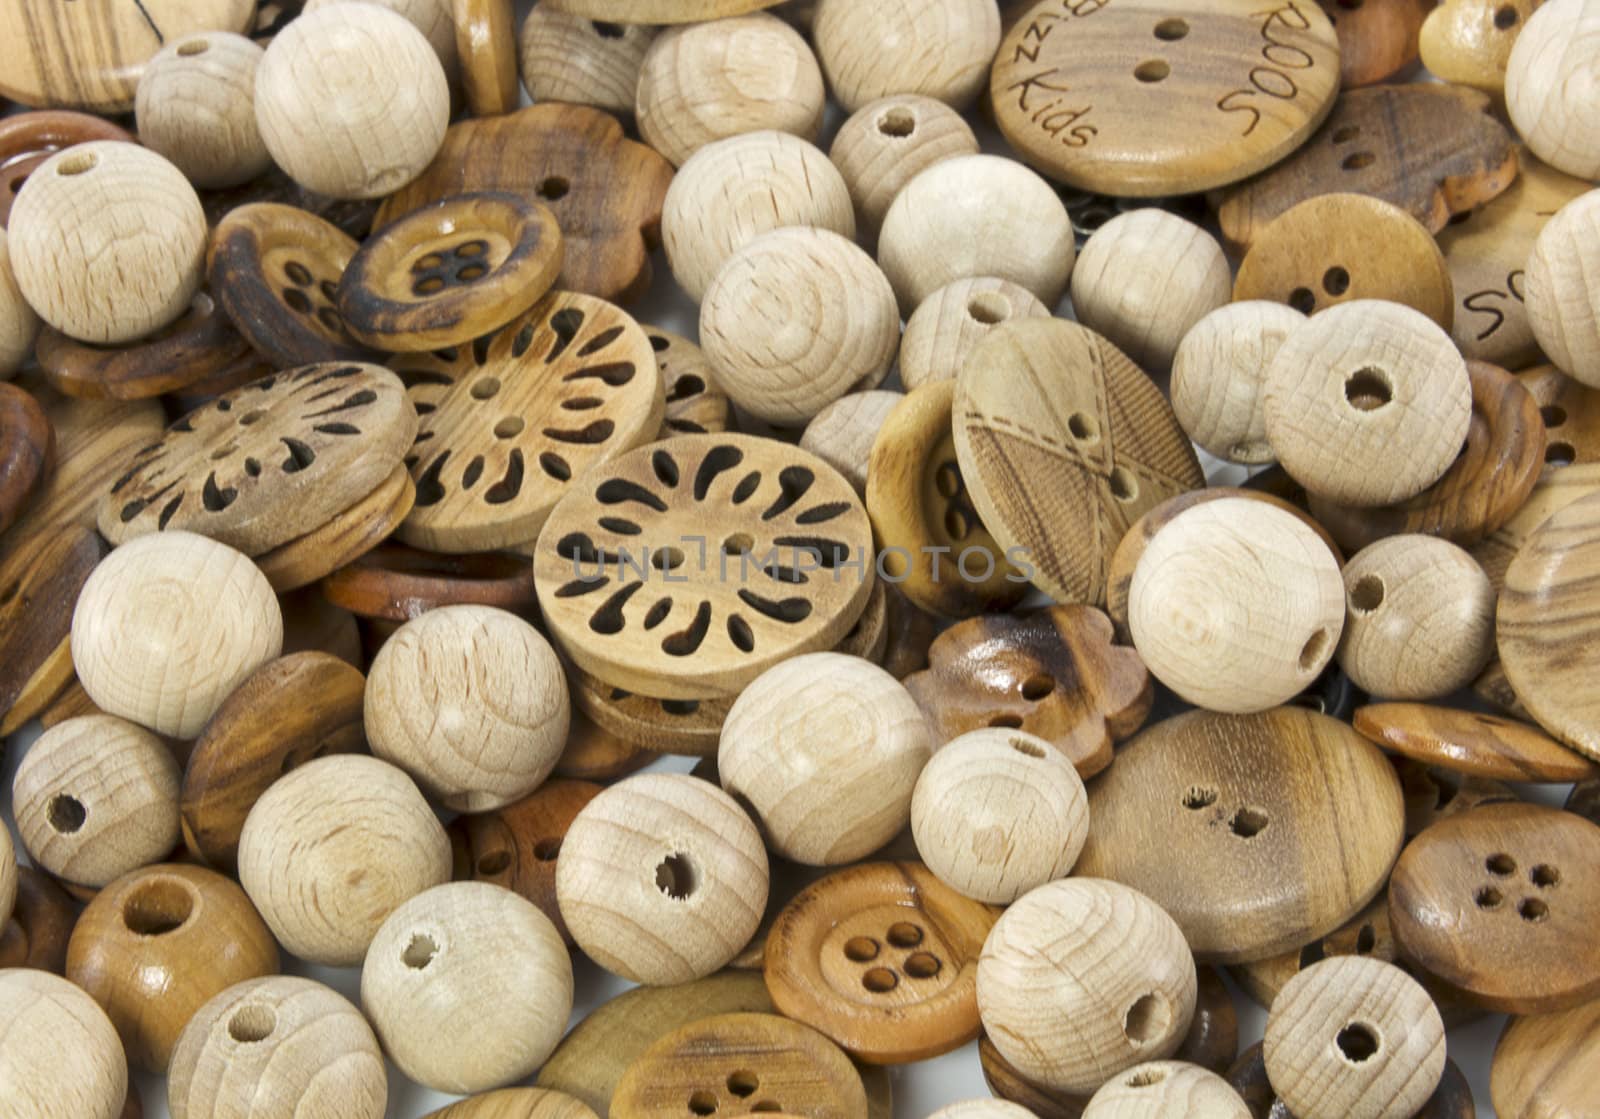   wooden tailor buttons  by compuinfoto